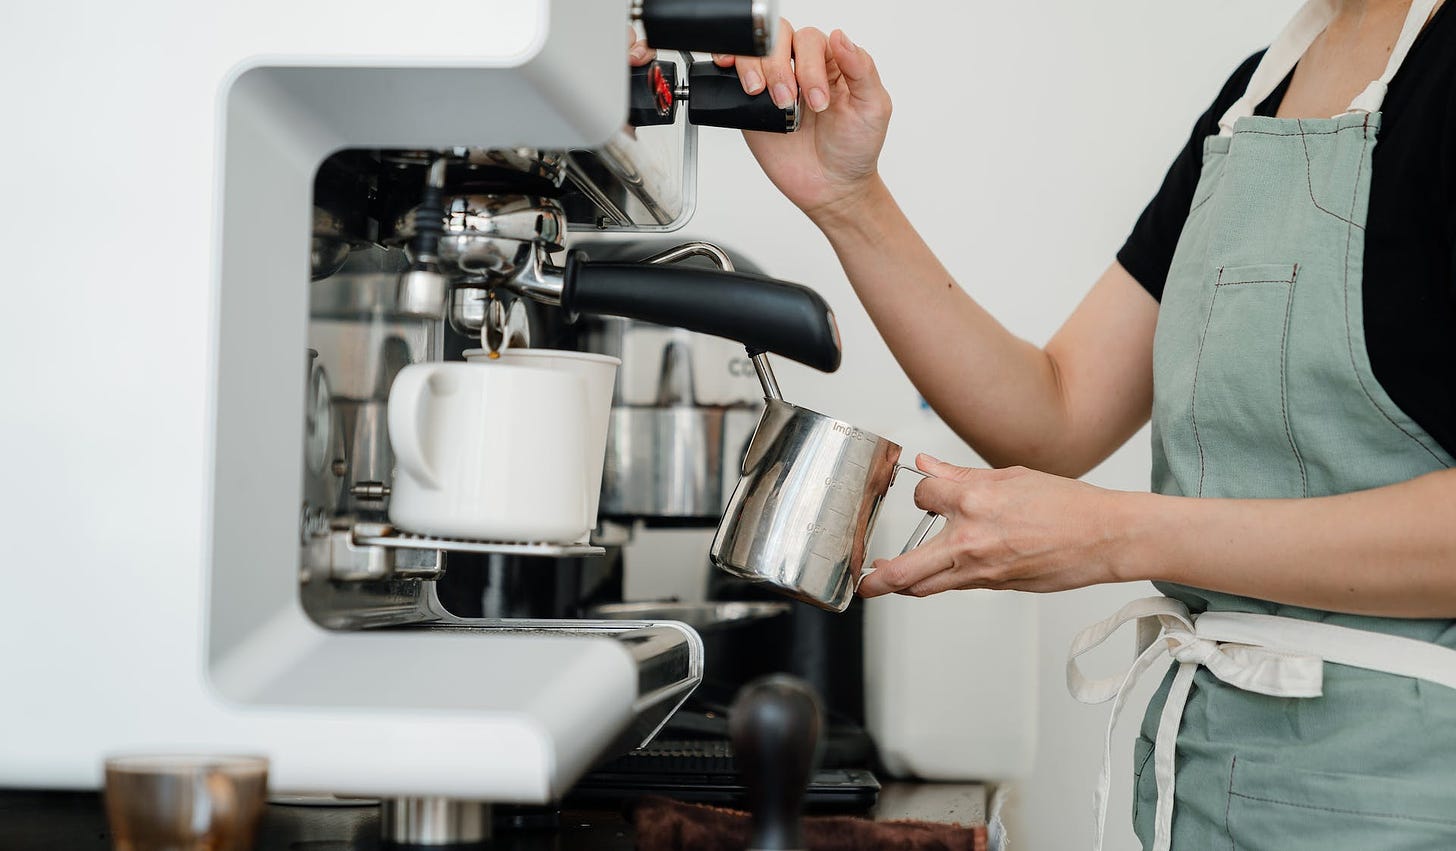 Photo by Ketut Subiyanto: https://www.pexels.com/photo/crop-young-woman-whipping-milk-using-professional-machine-in-coffee-shop-4349954/